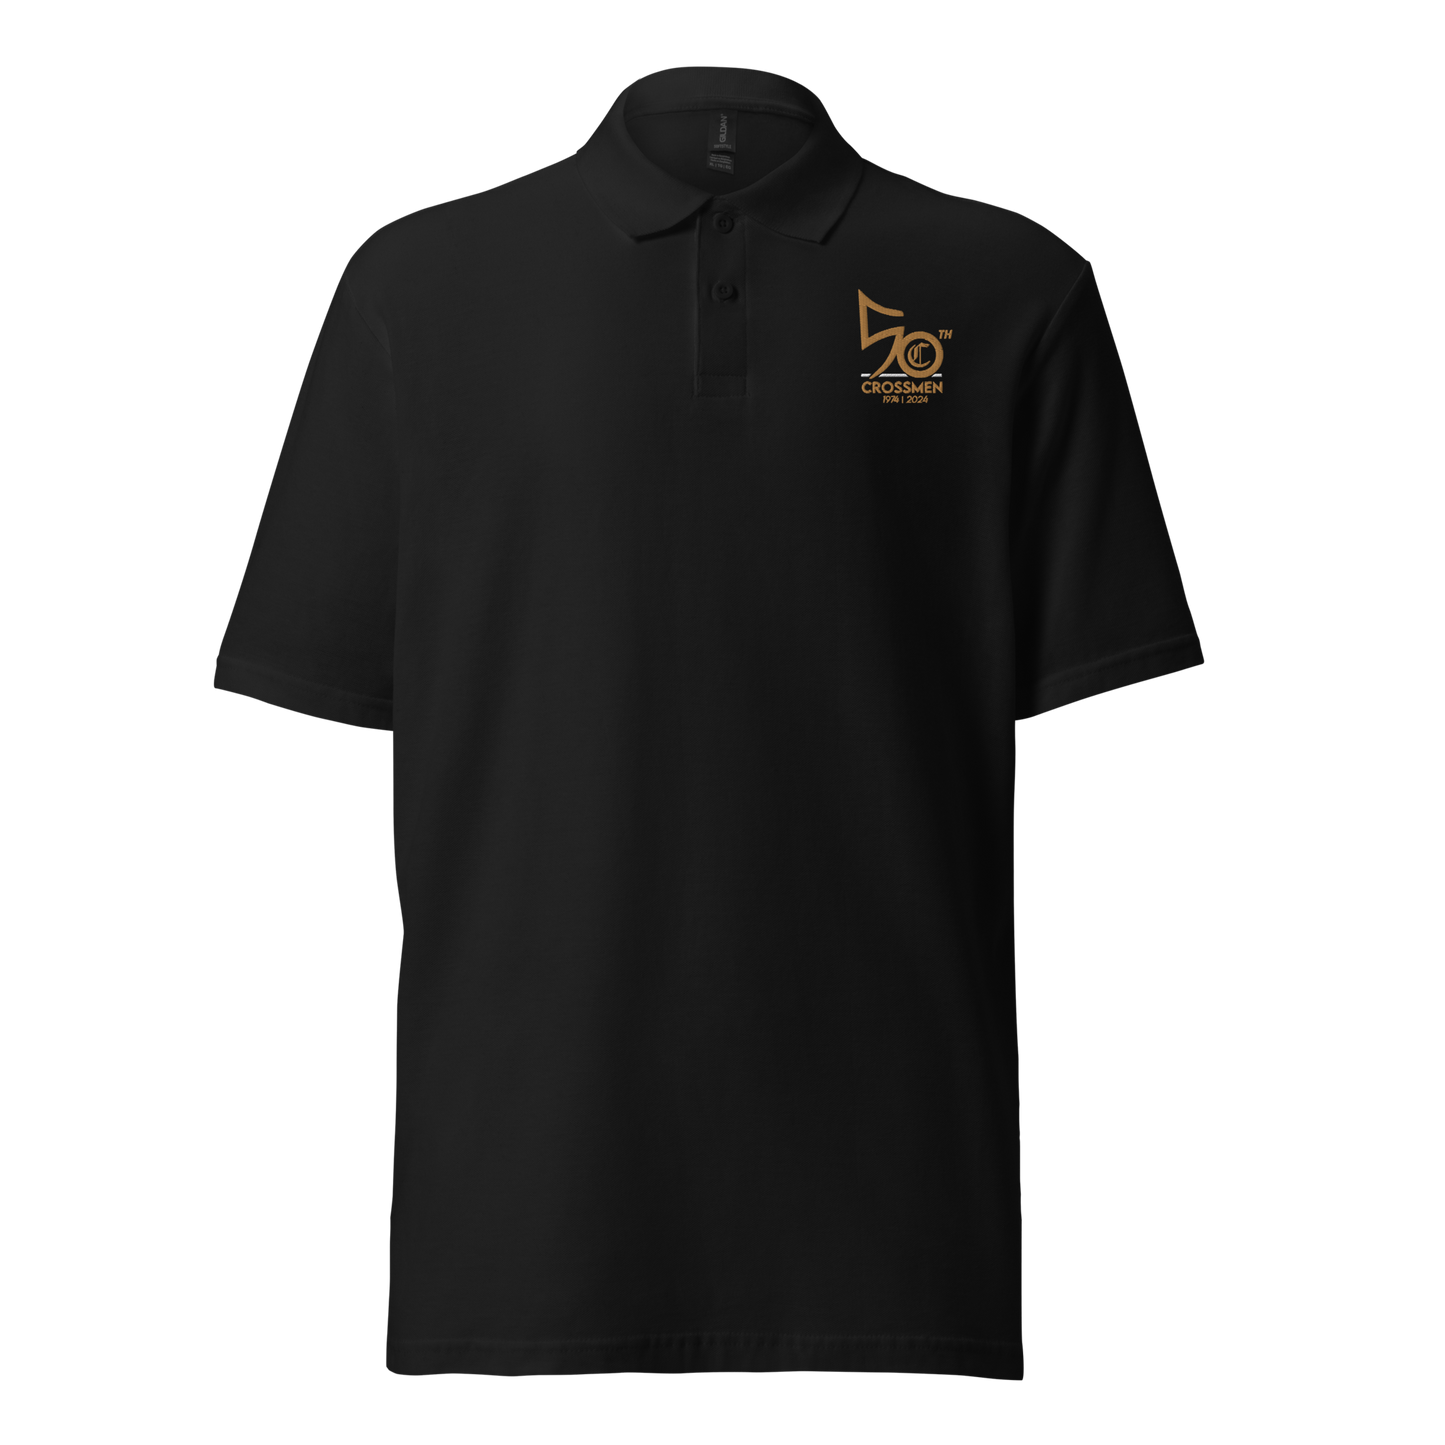 50th Anniversary Embroidered Unisex pique polo shirt